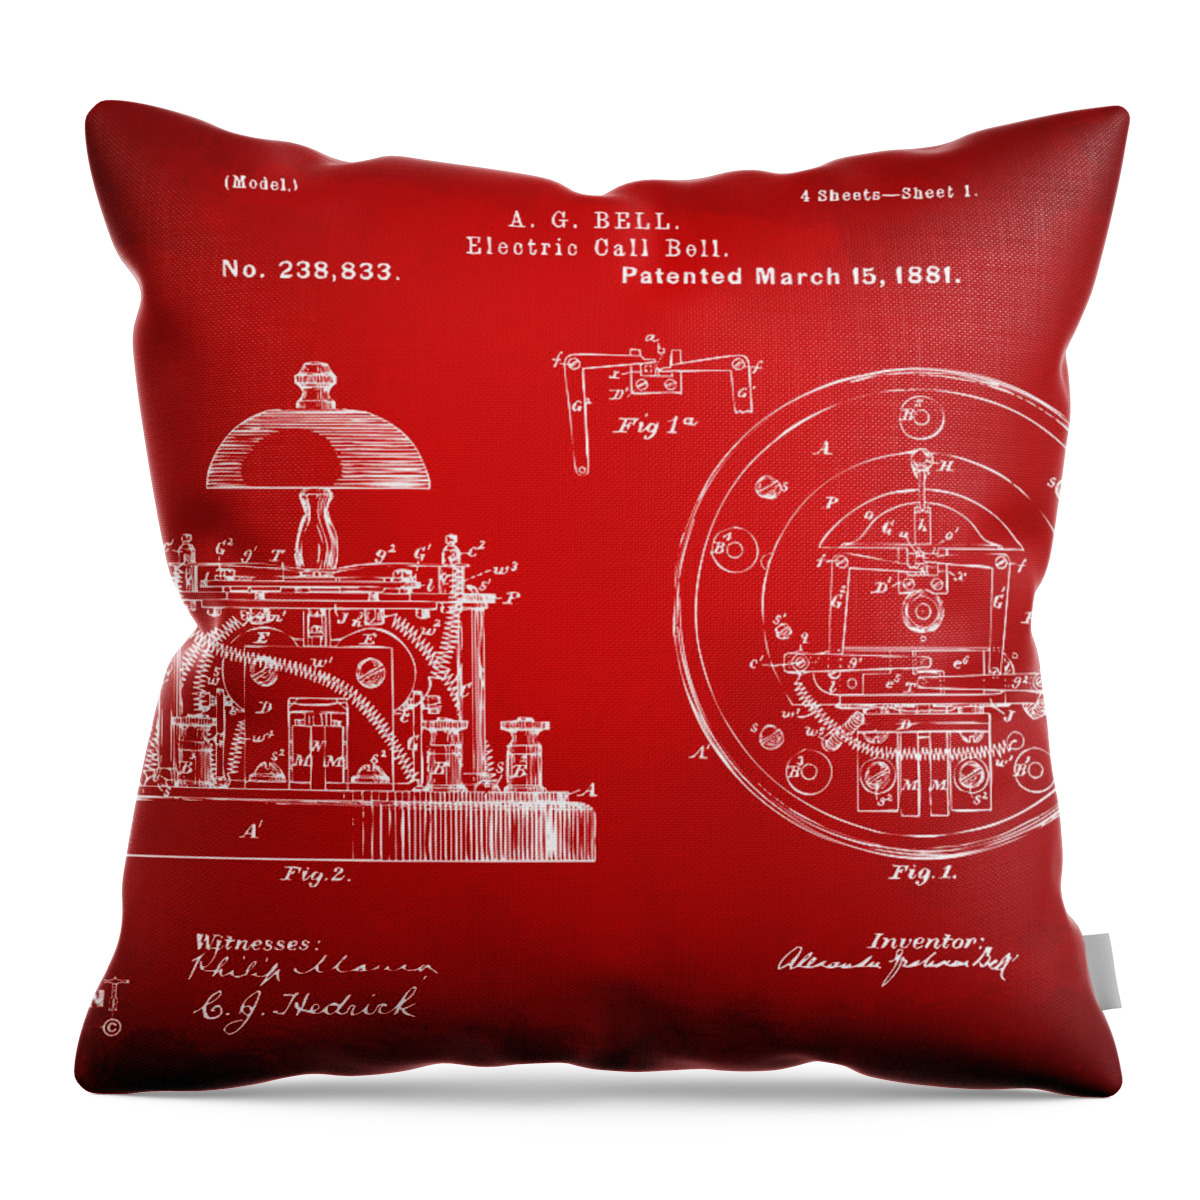 Alexander Graham Bell Throw Pillow featuring the digital art 1881 Alexander Graham Bell Electric Call Bell Patent Red by Nikki Marie Smith